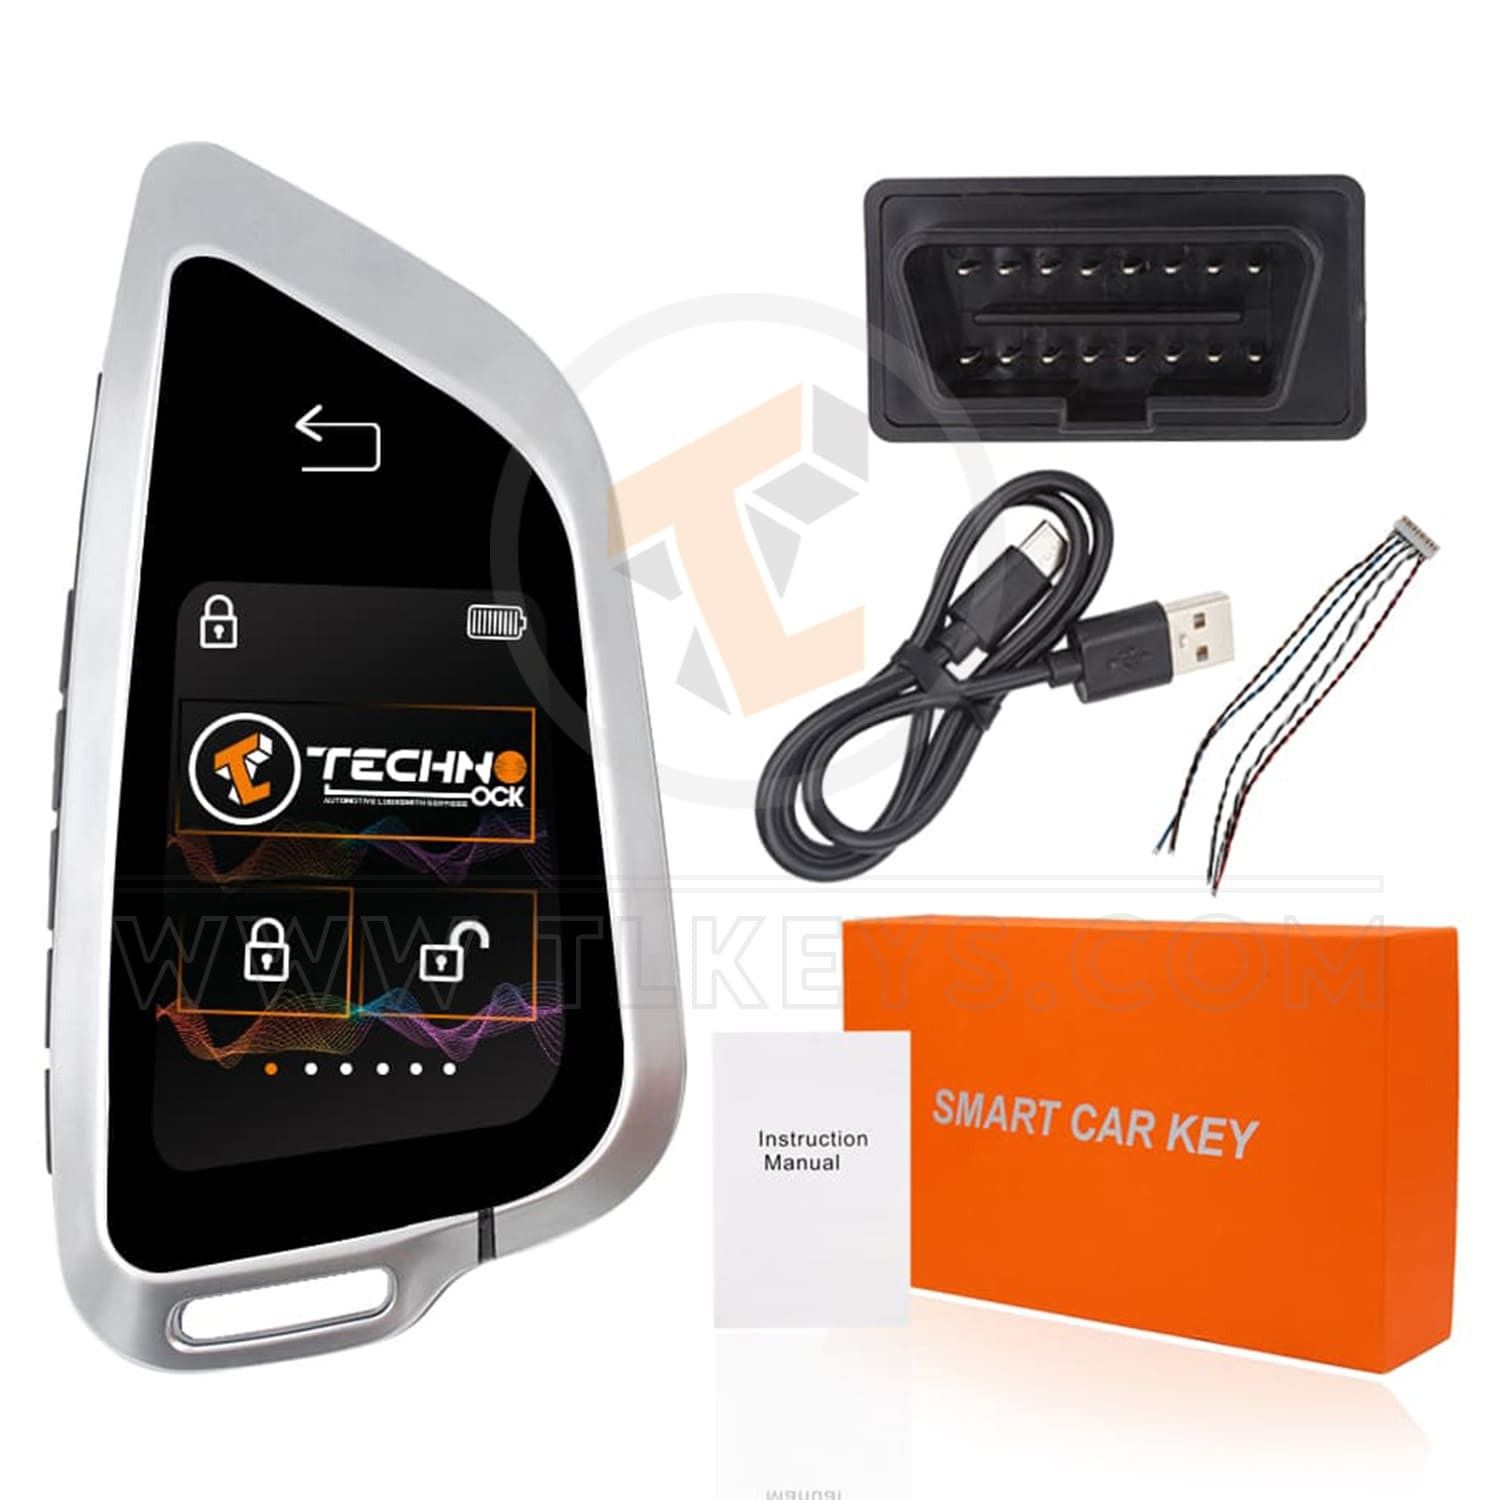 LCD Universal Modified Smart Key Remote Kit For All Keyless Entry Car BMW Knife Type lcd remote